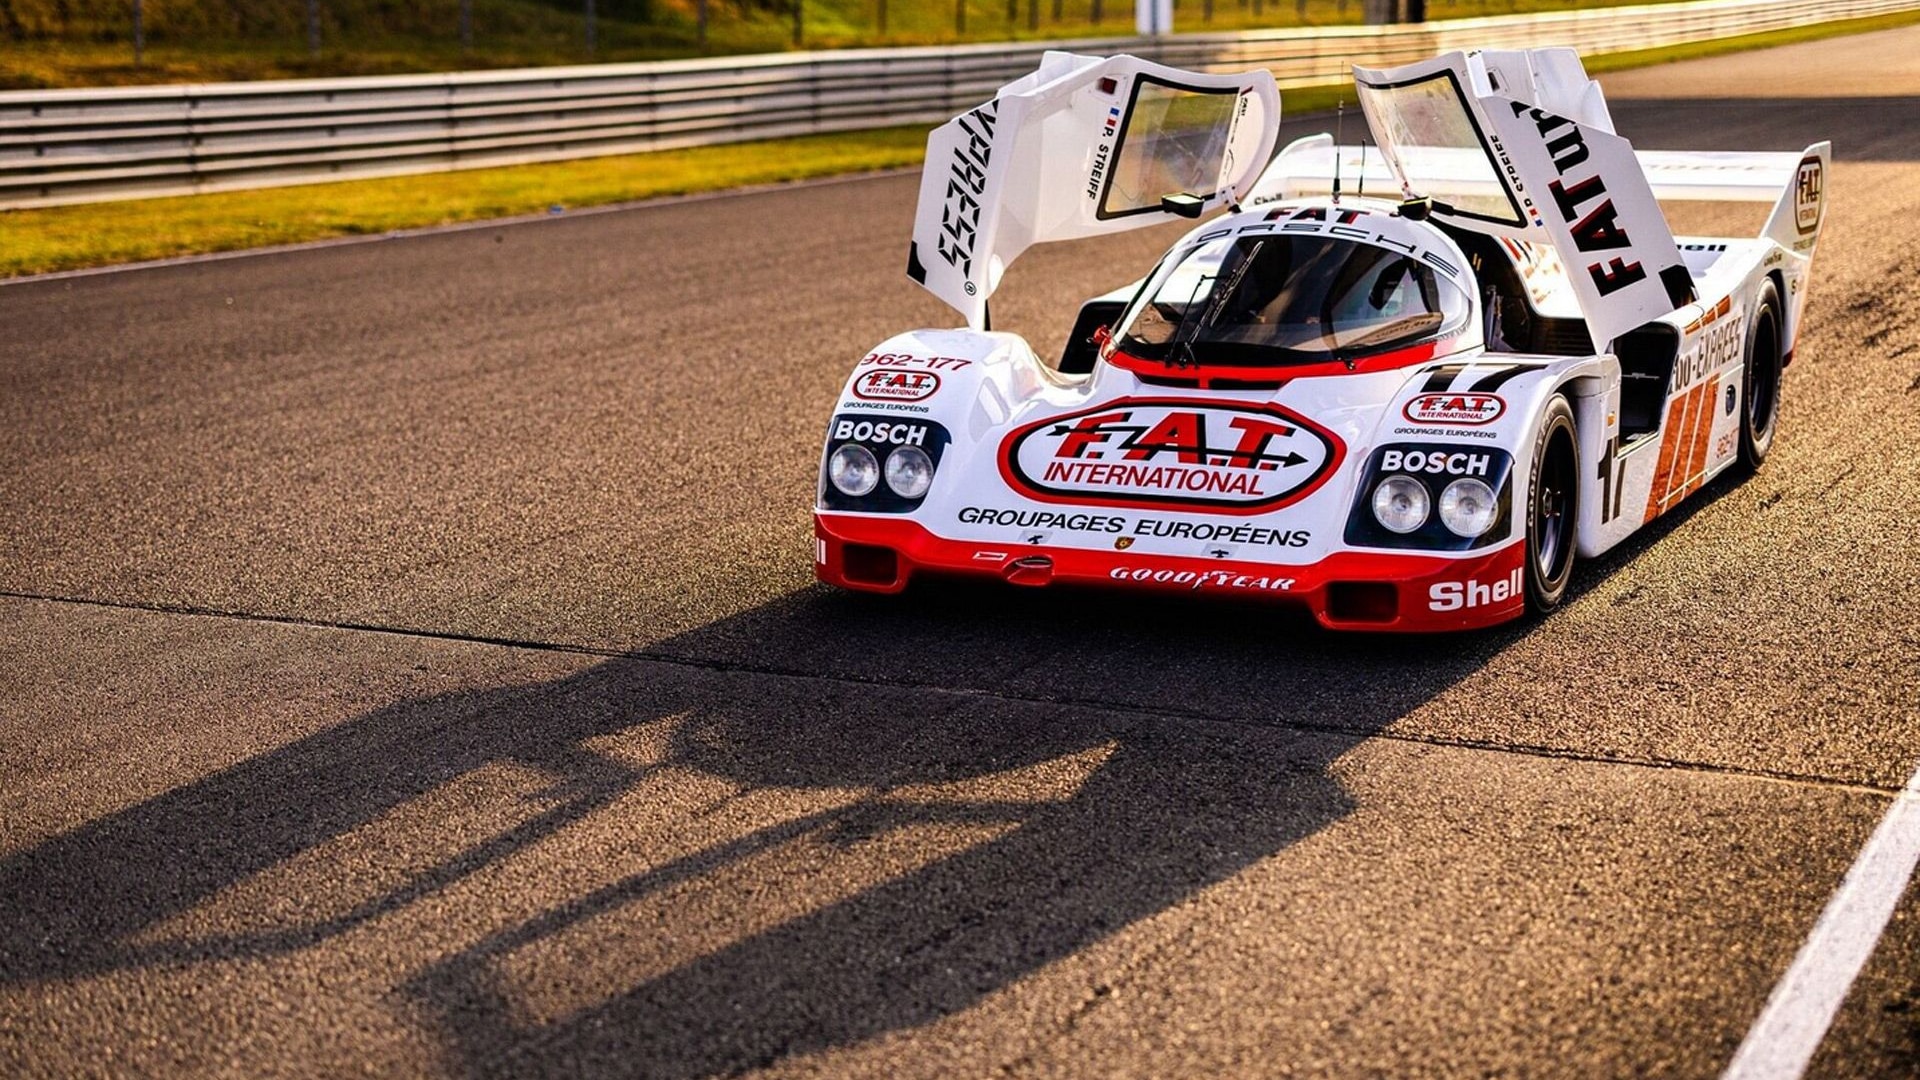 1991 Porsche 962 bearing chassis no. 962-177 - Photo credit: RM Sotheby's